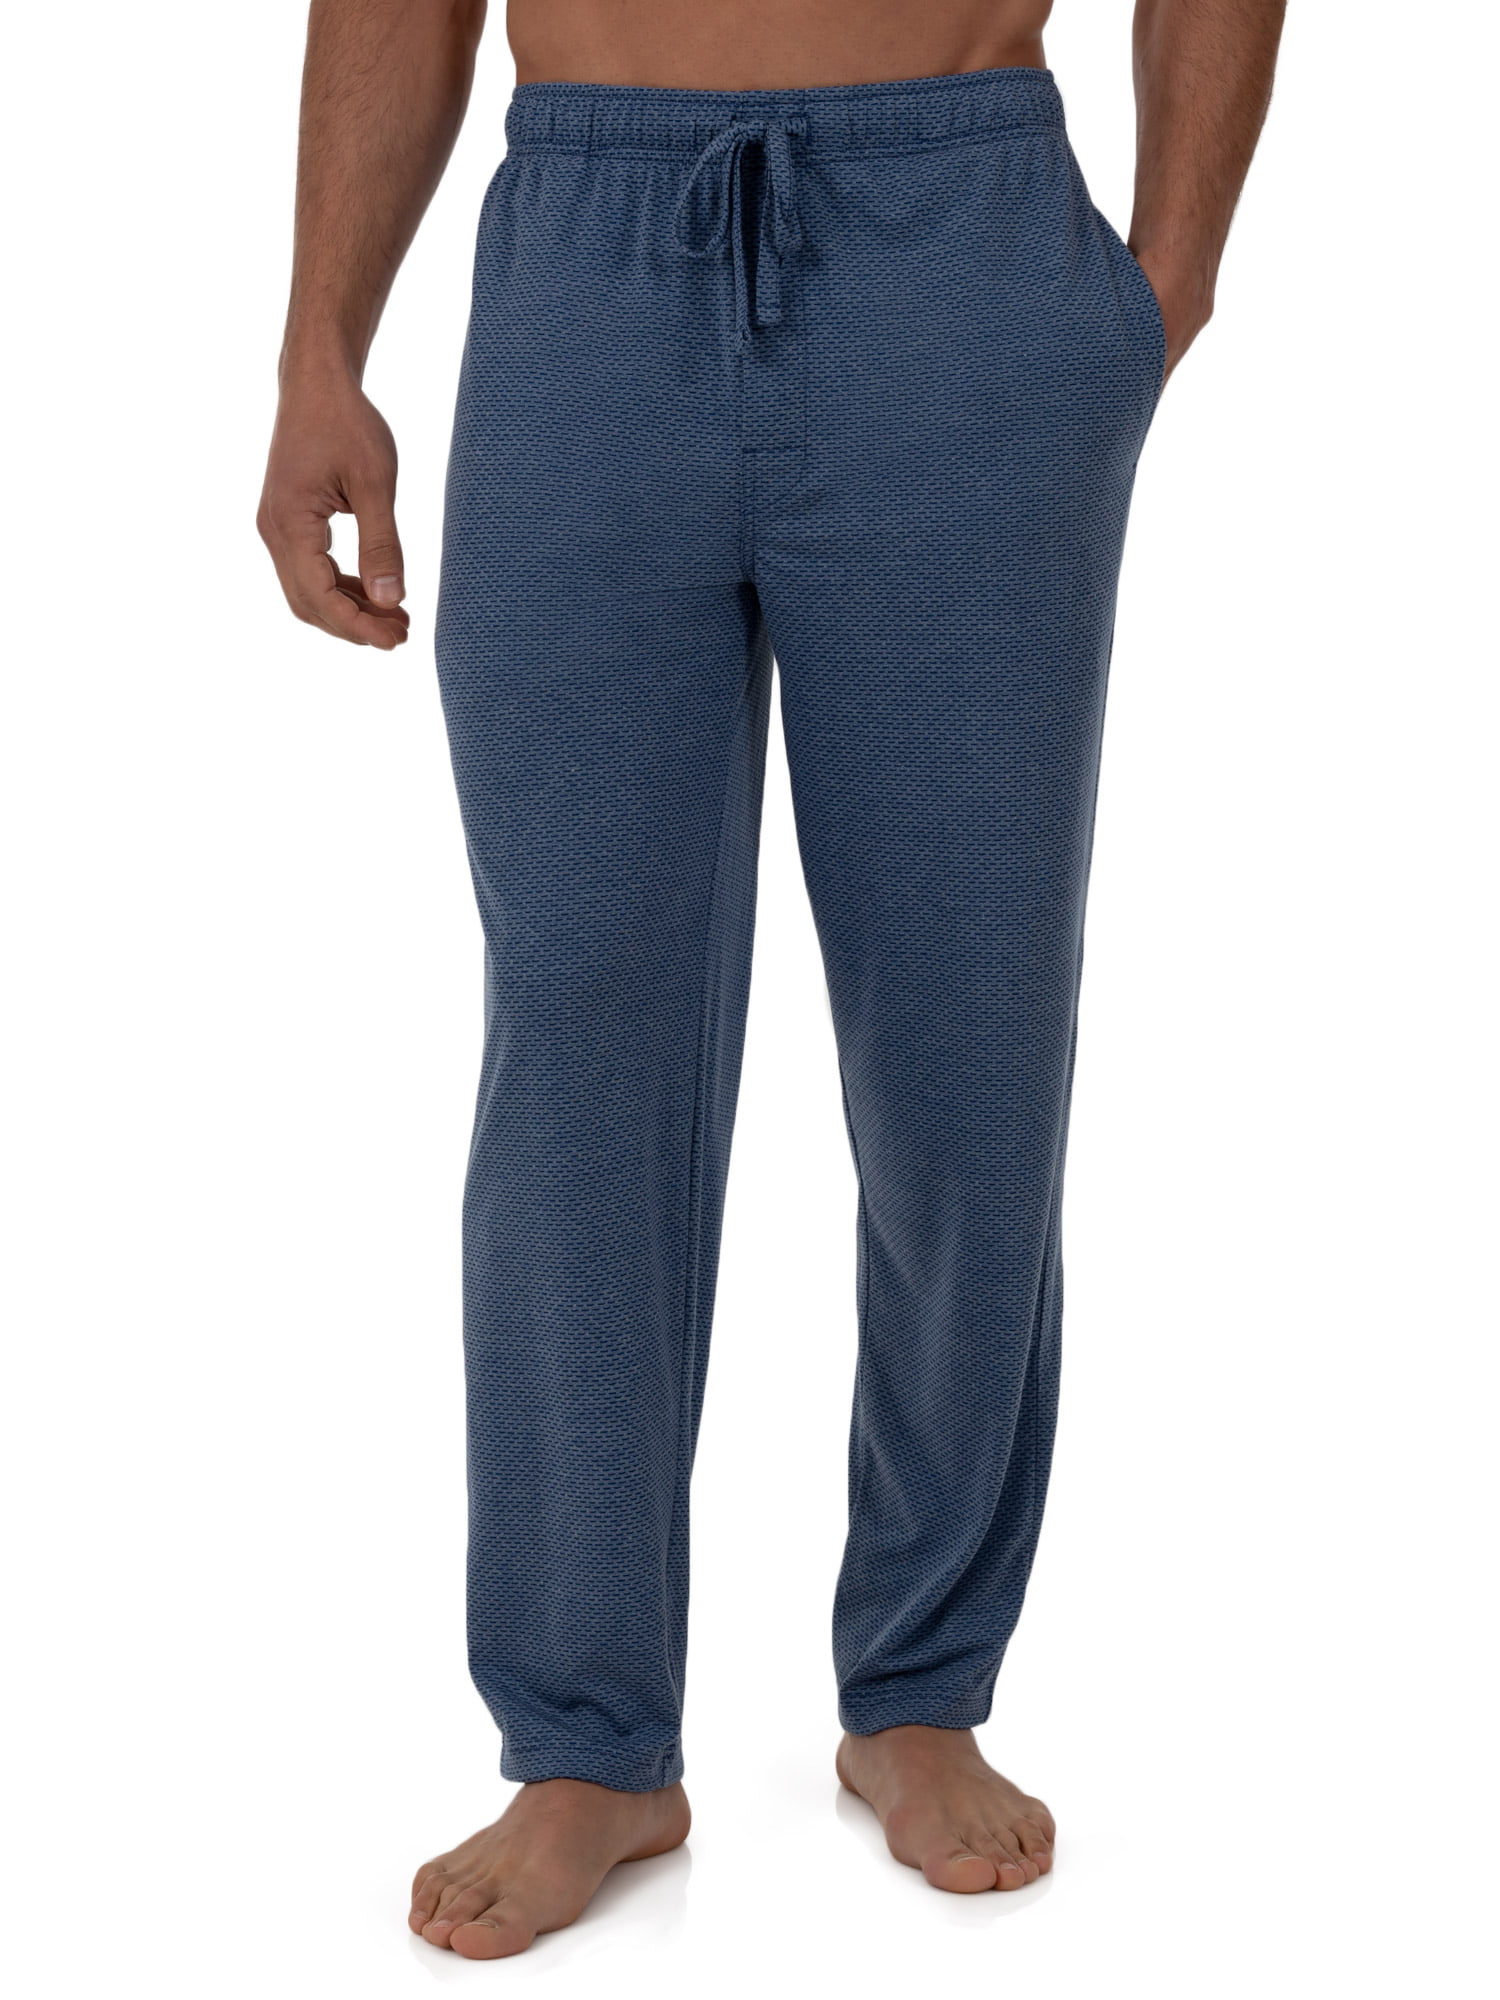 Fruit of the Loom Men's Breathable Mesh Knit Pajama Pant Blue SIZE S/P ...